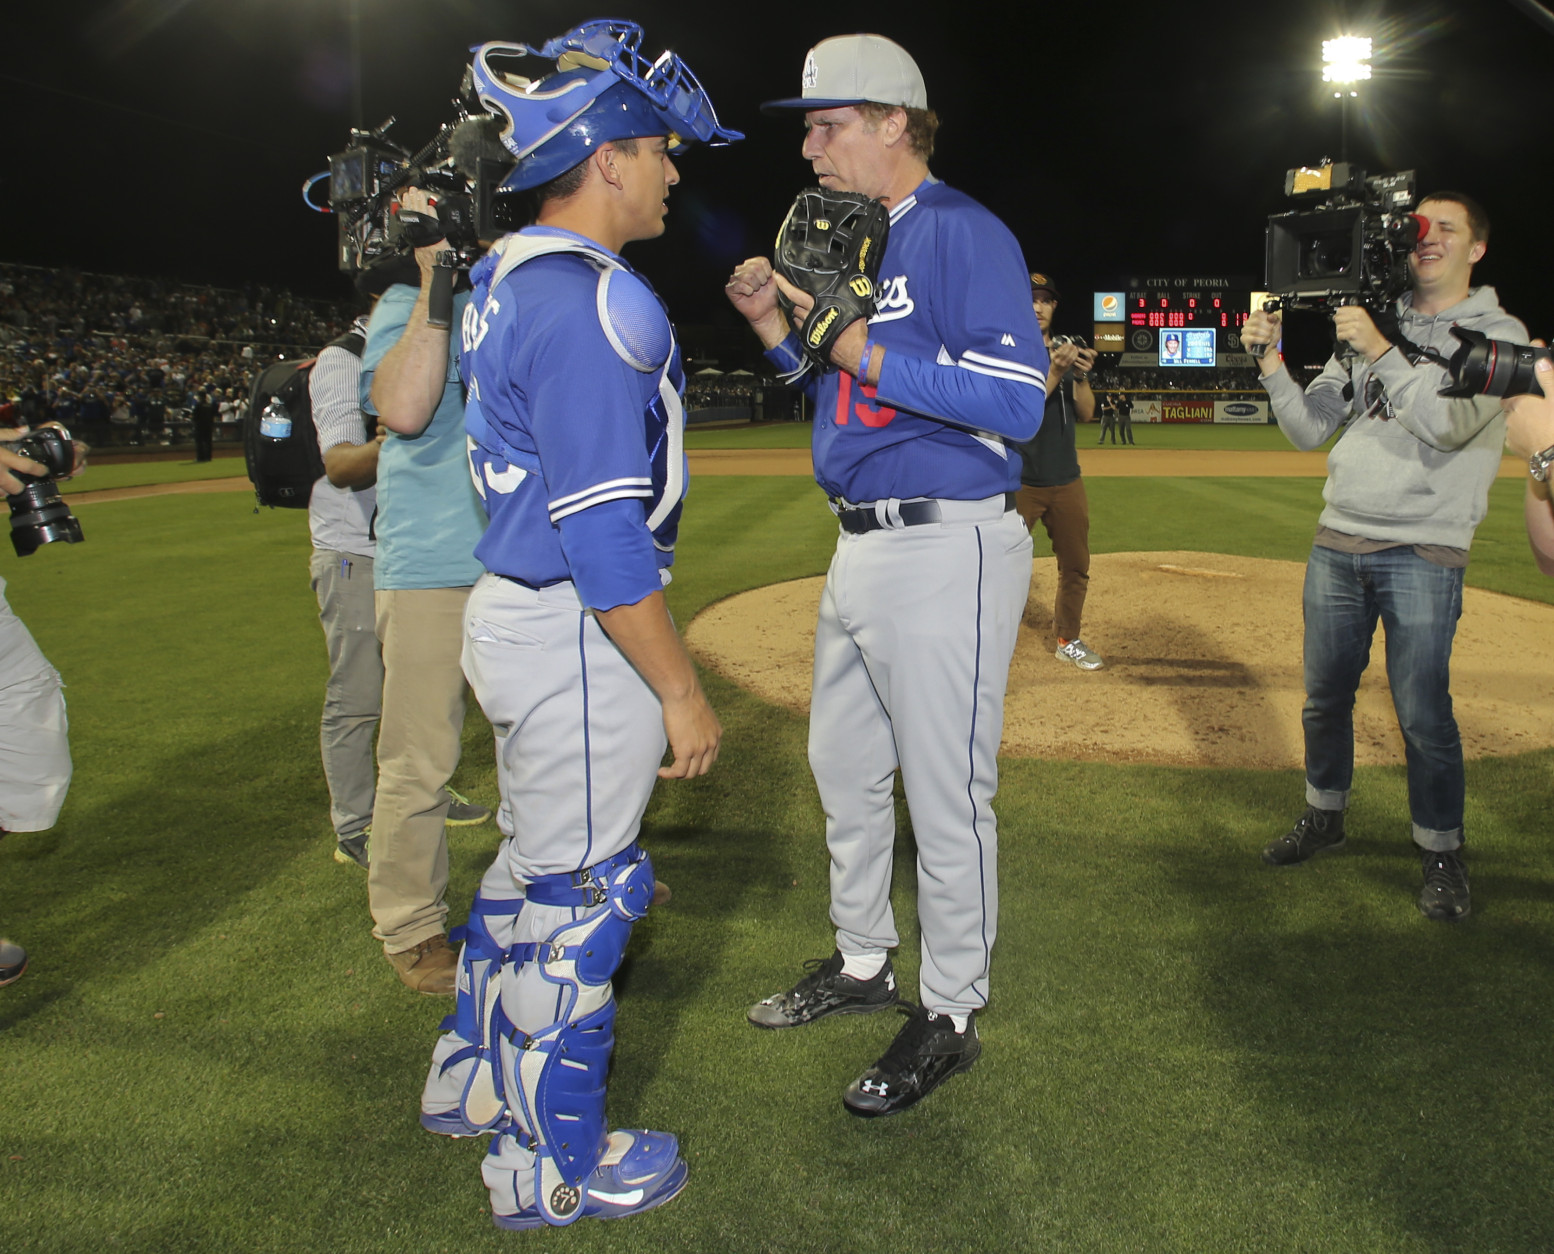 Actor Will Ferrell has a meeting with Los Angeles Dodgers catcher A.J. Ellis before he warms up to pitch against the San Diego Padres in a spring training baseball game Thursday, March 12, 2015, in Peoria, Ariz.  (AP Photo/Lenny Ignelzi)